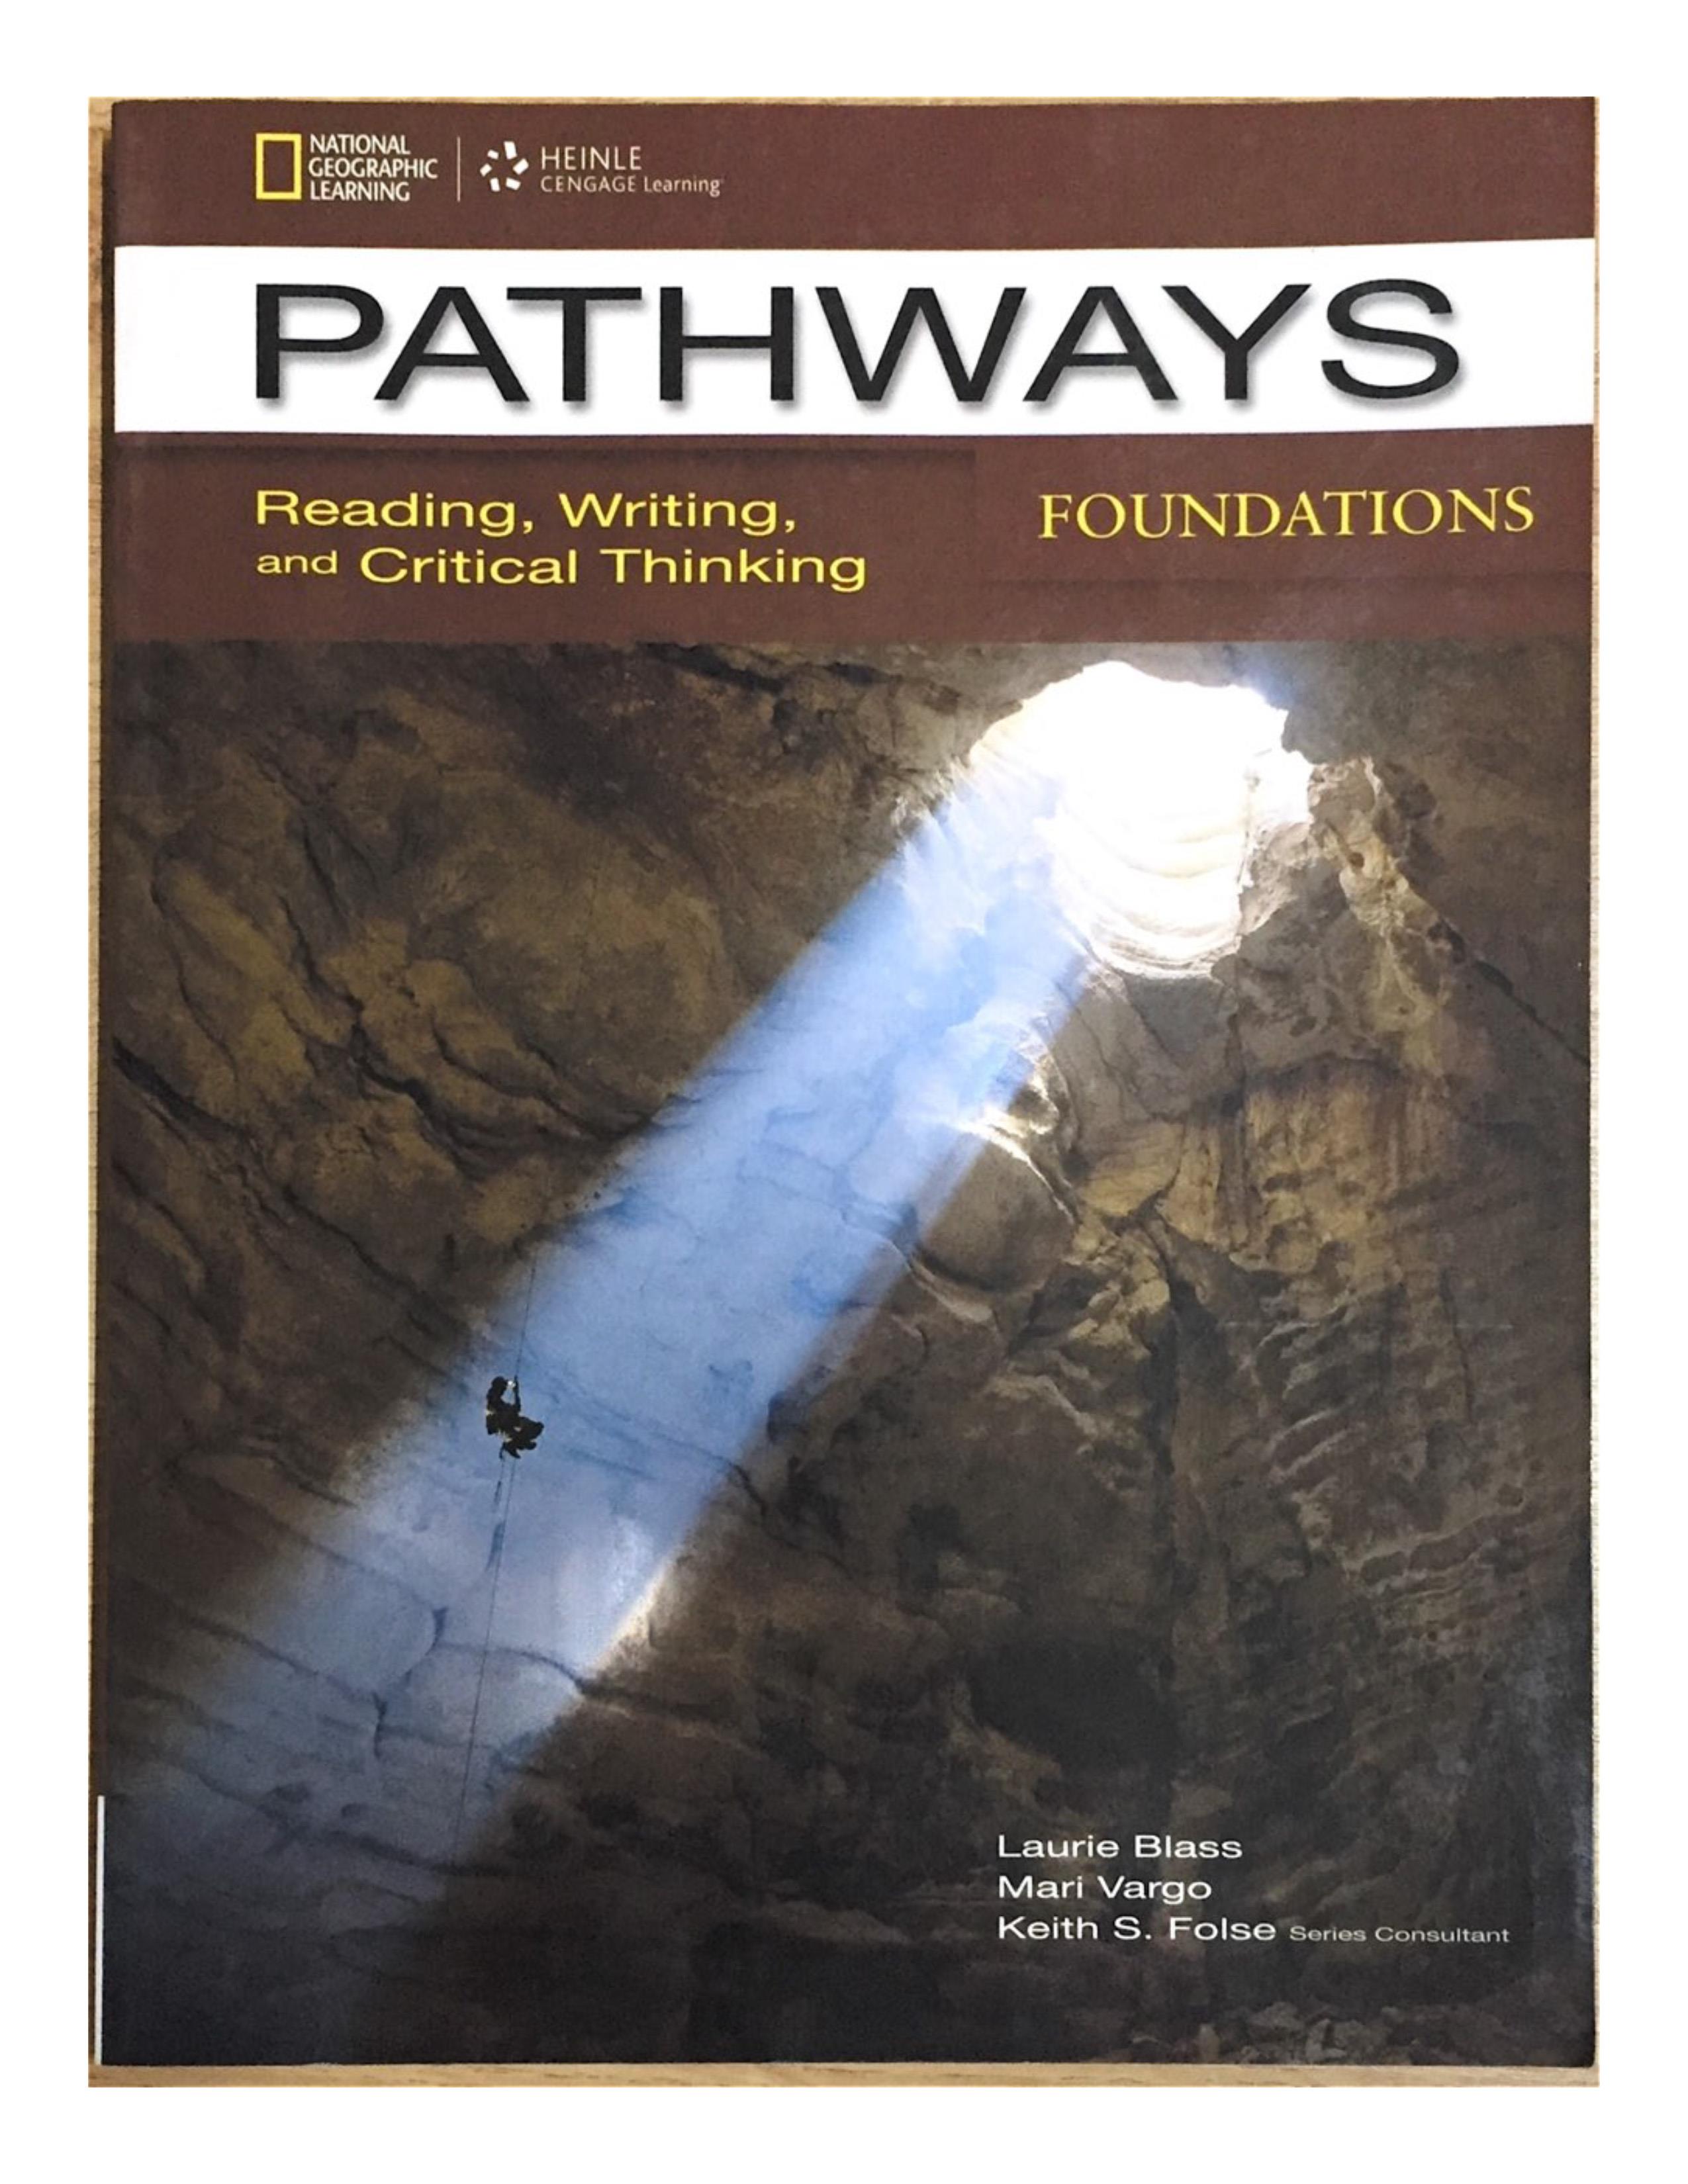 National Geographic  PATHWAYS- Reading, Writhing, and Crictical Thinking